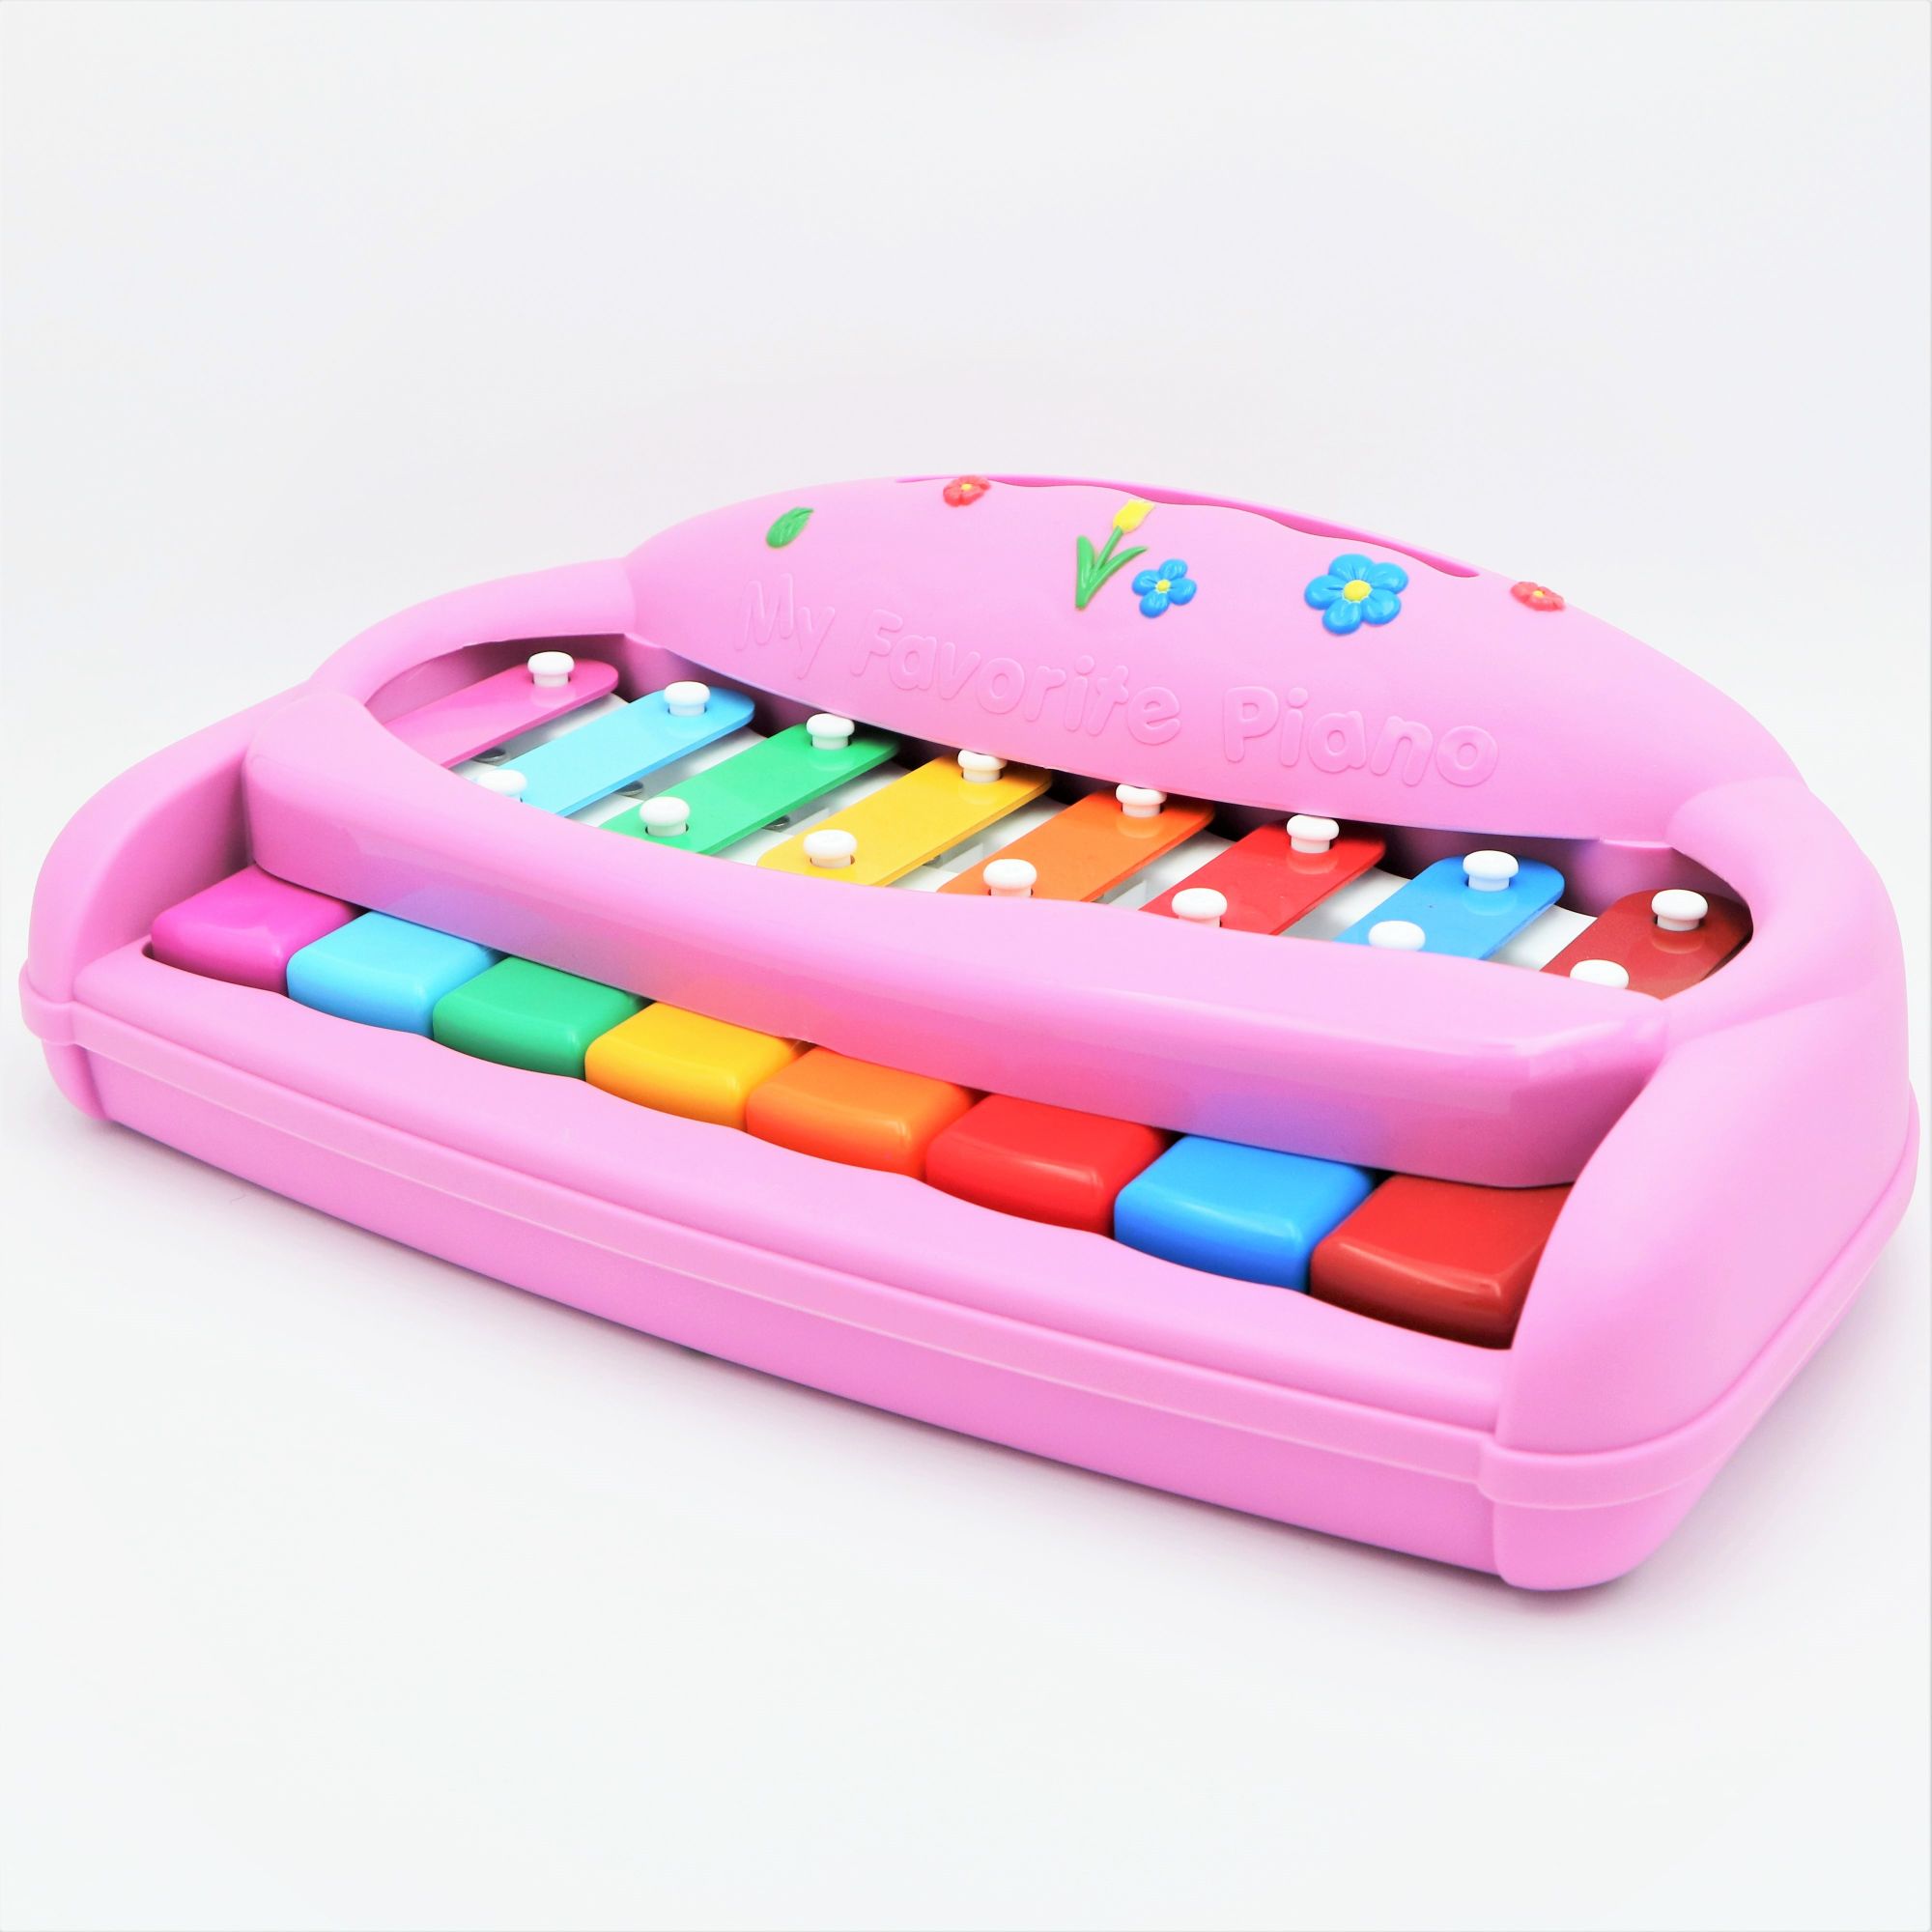 8 Note piano toy for children